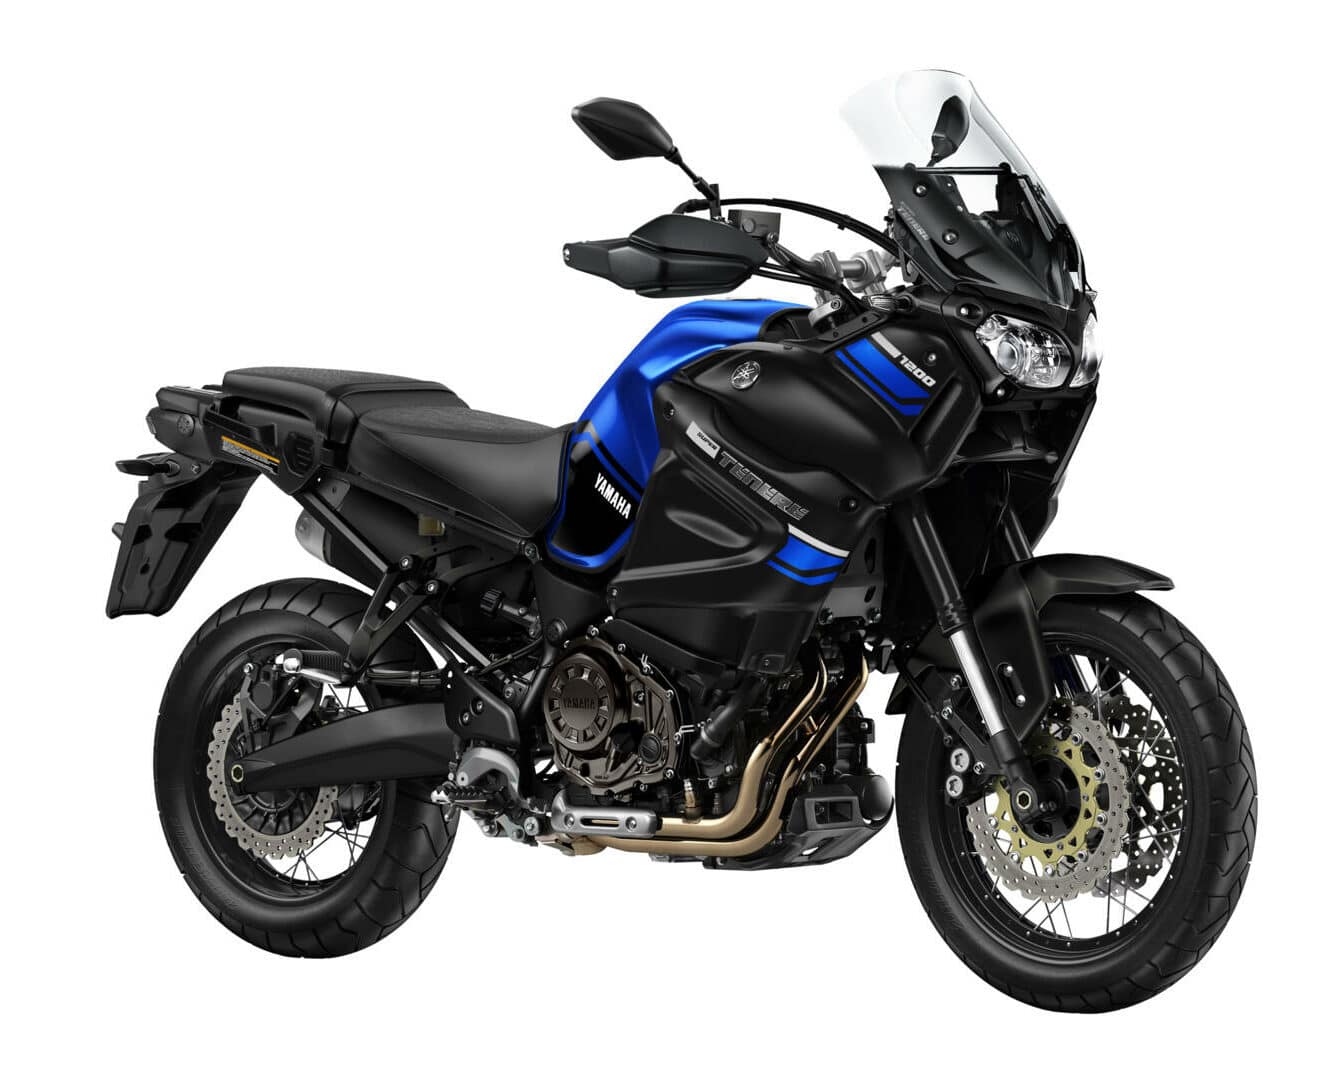 Most Reliable Motorcycle: A Guide to the Top 12 Brands